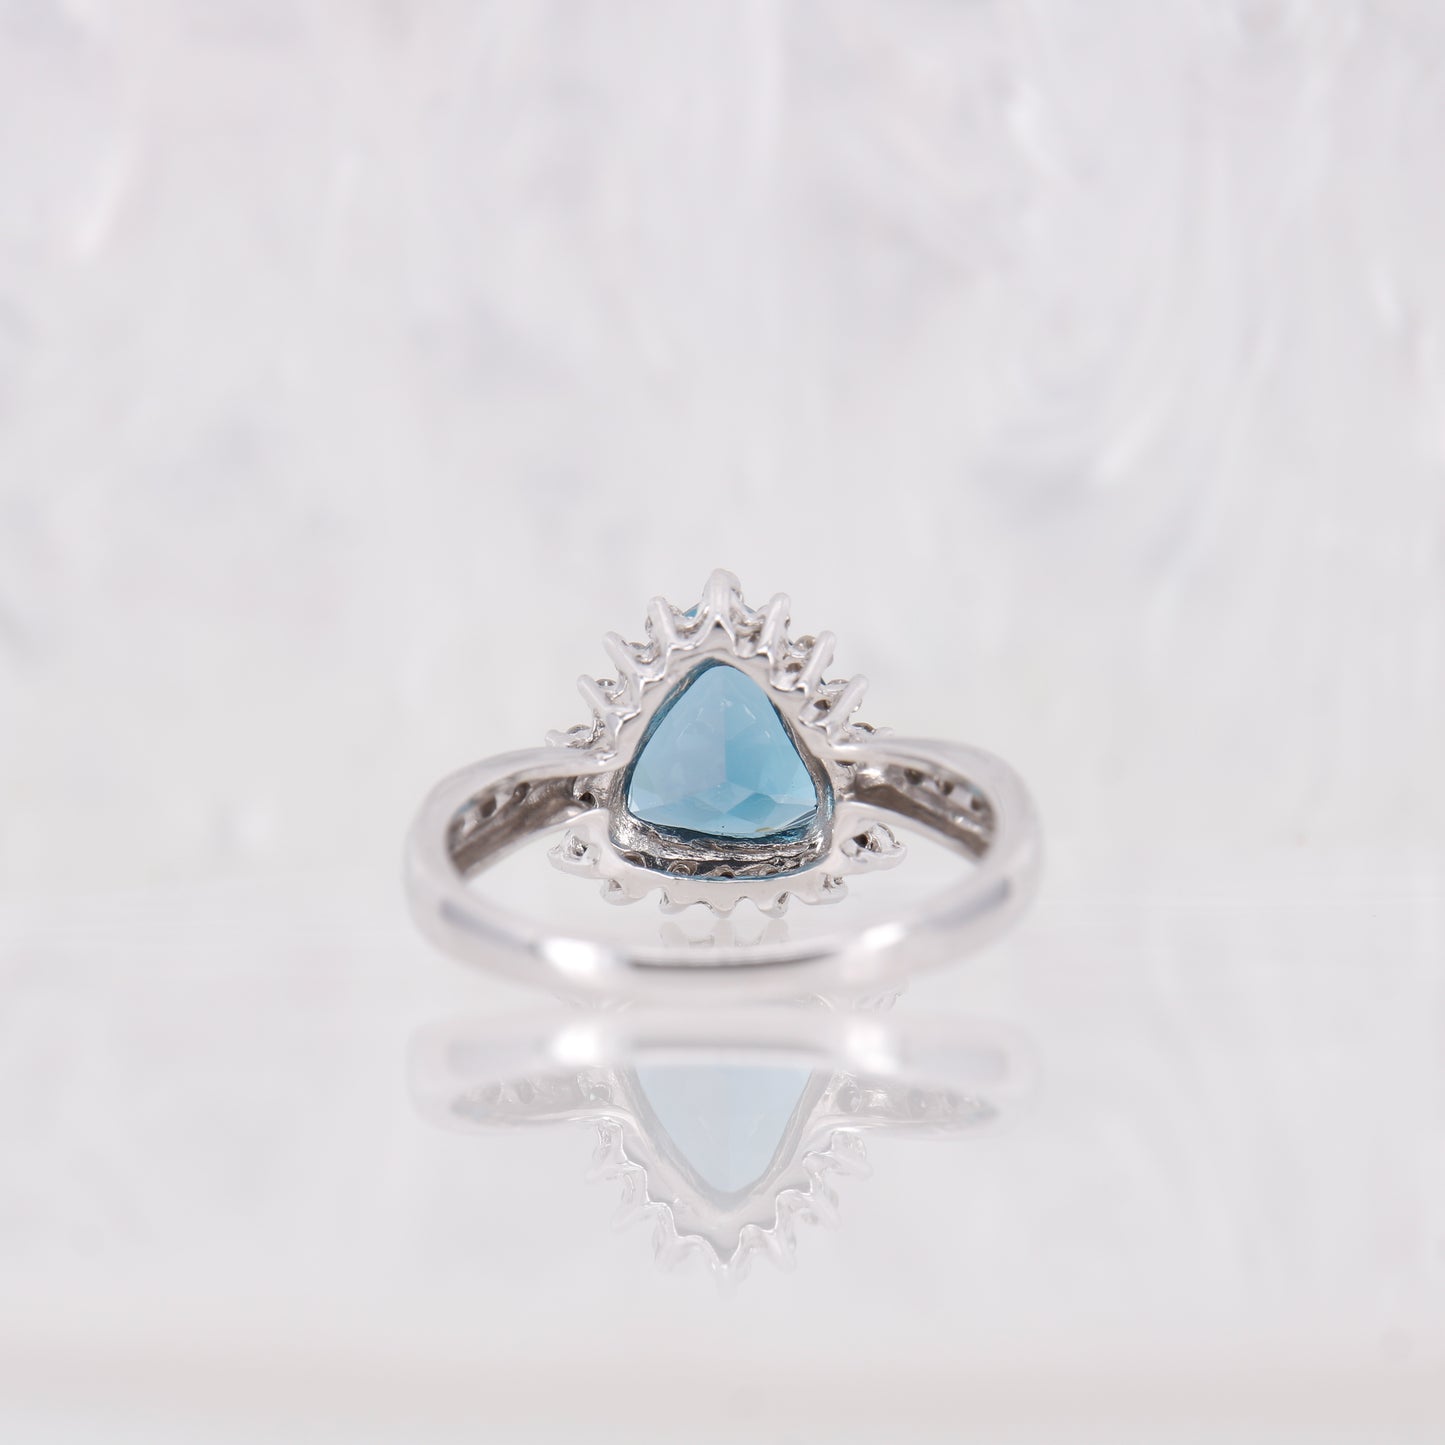 Blue Topaz and Diamond ring, Trilliant cut blue topaz with a halo of diamonds, white gold.